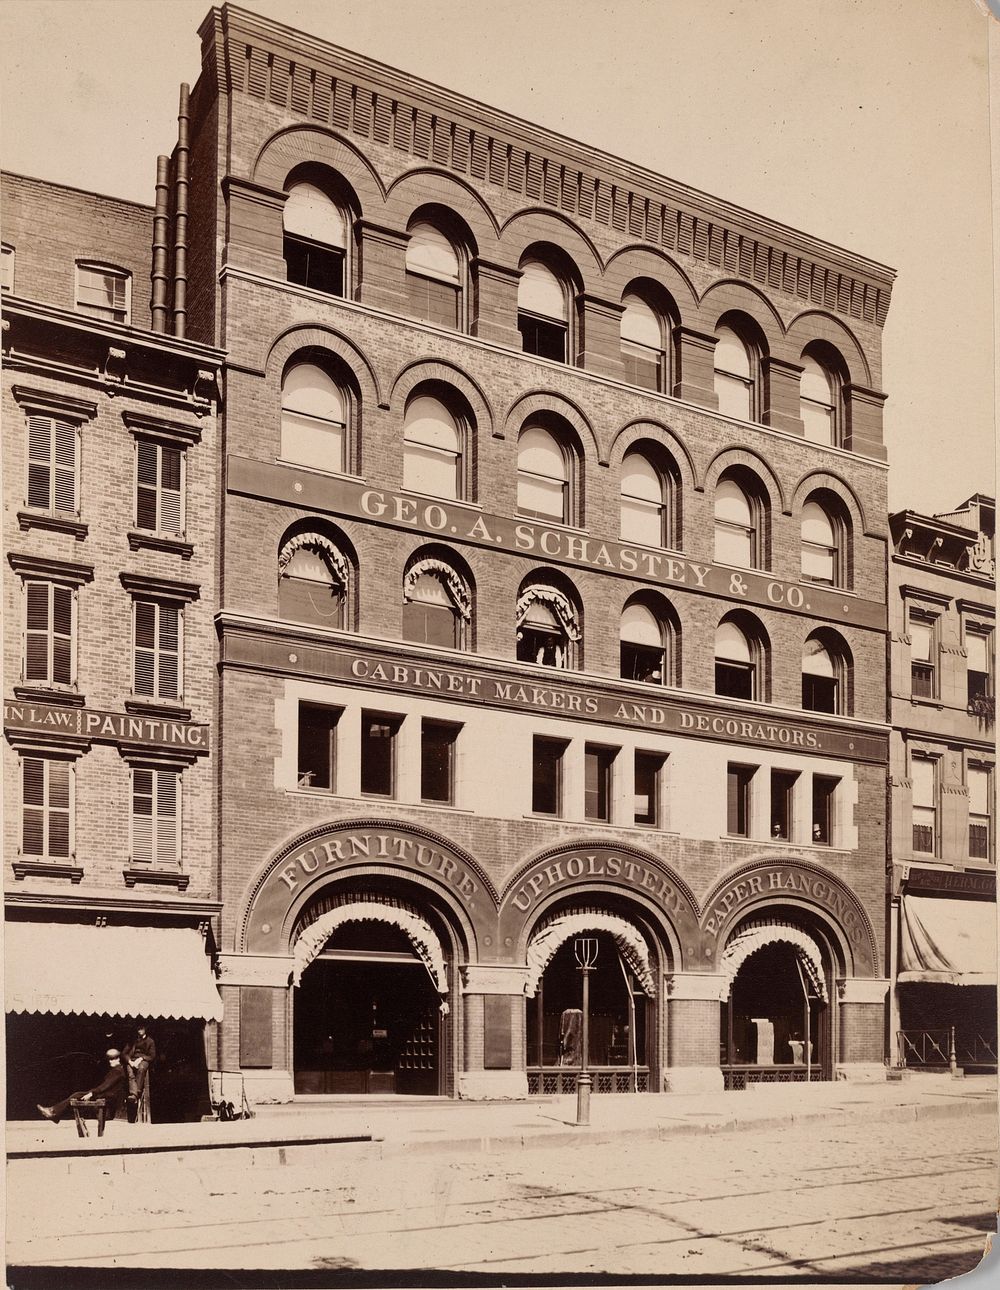 Photograph of George A. Schastey & Co., 1681-1683 Broadway